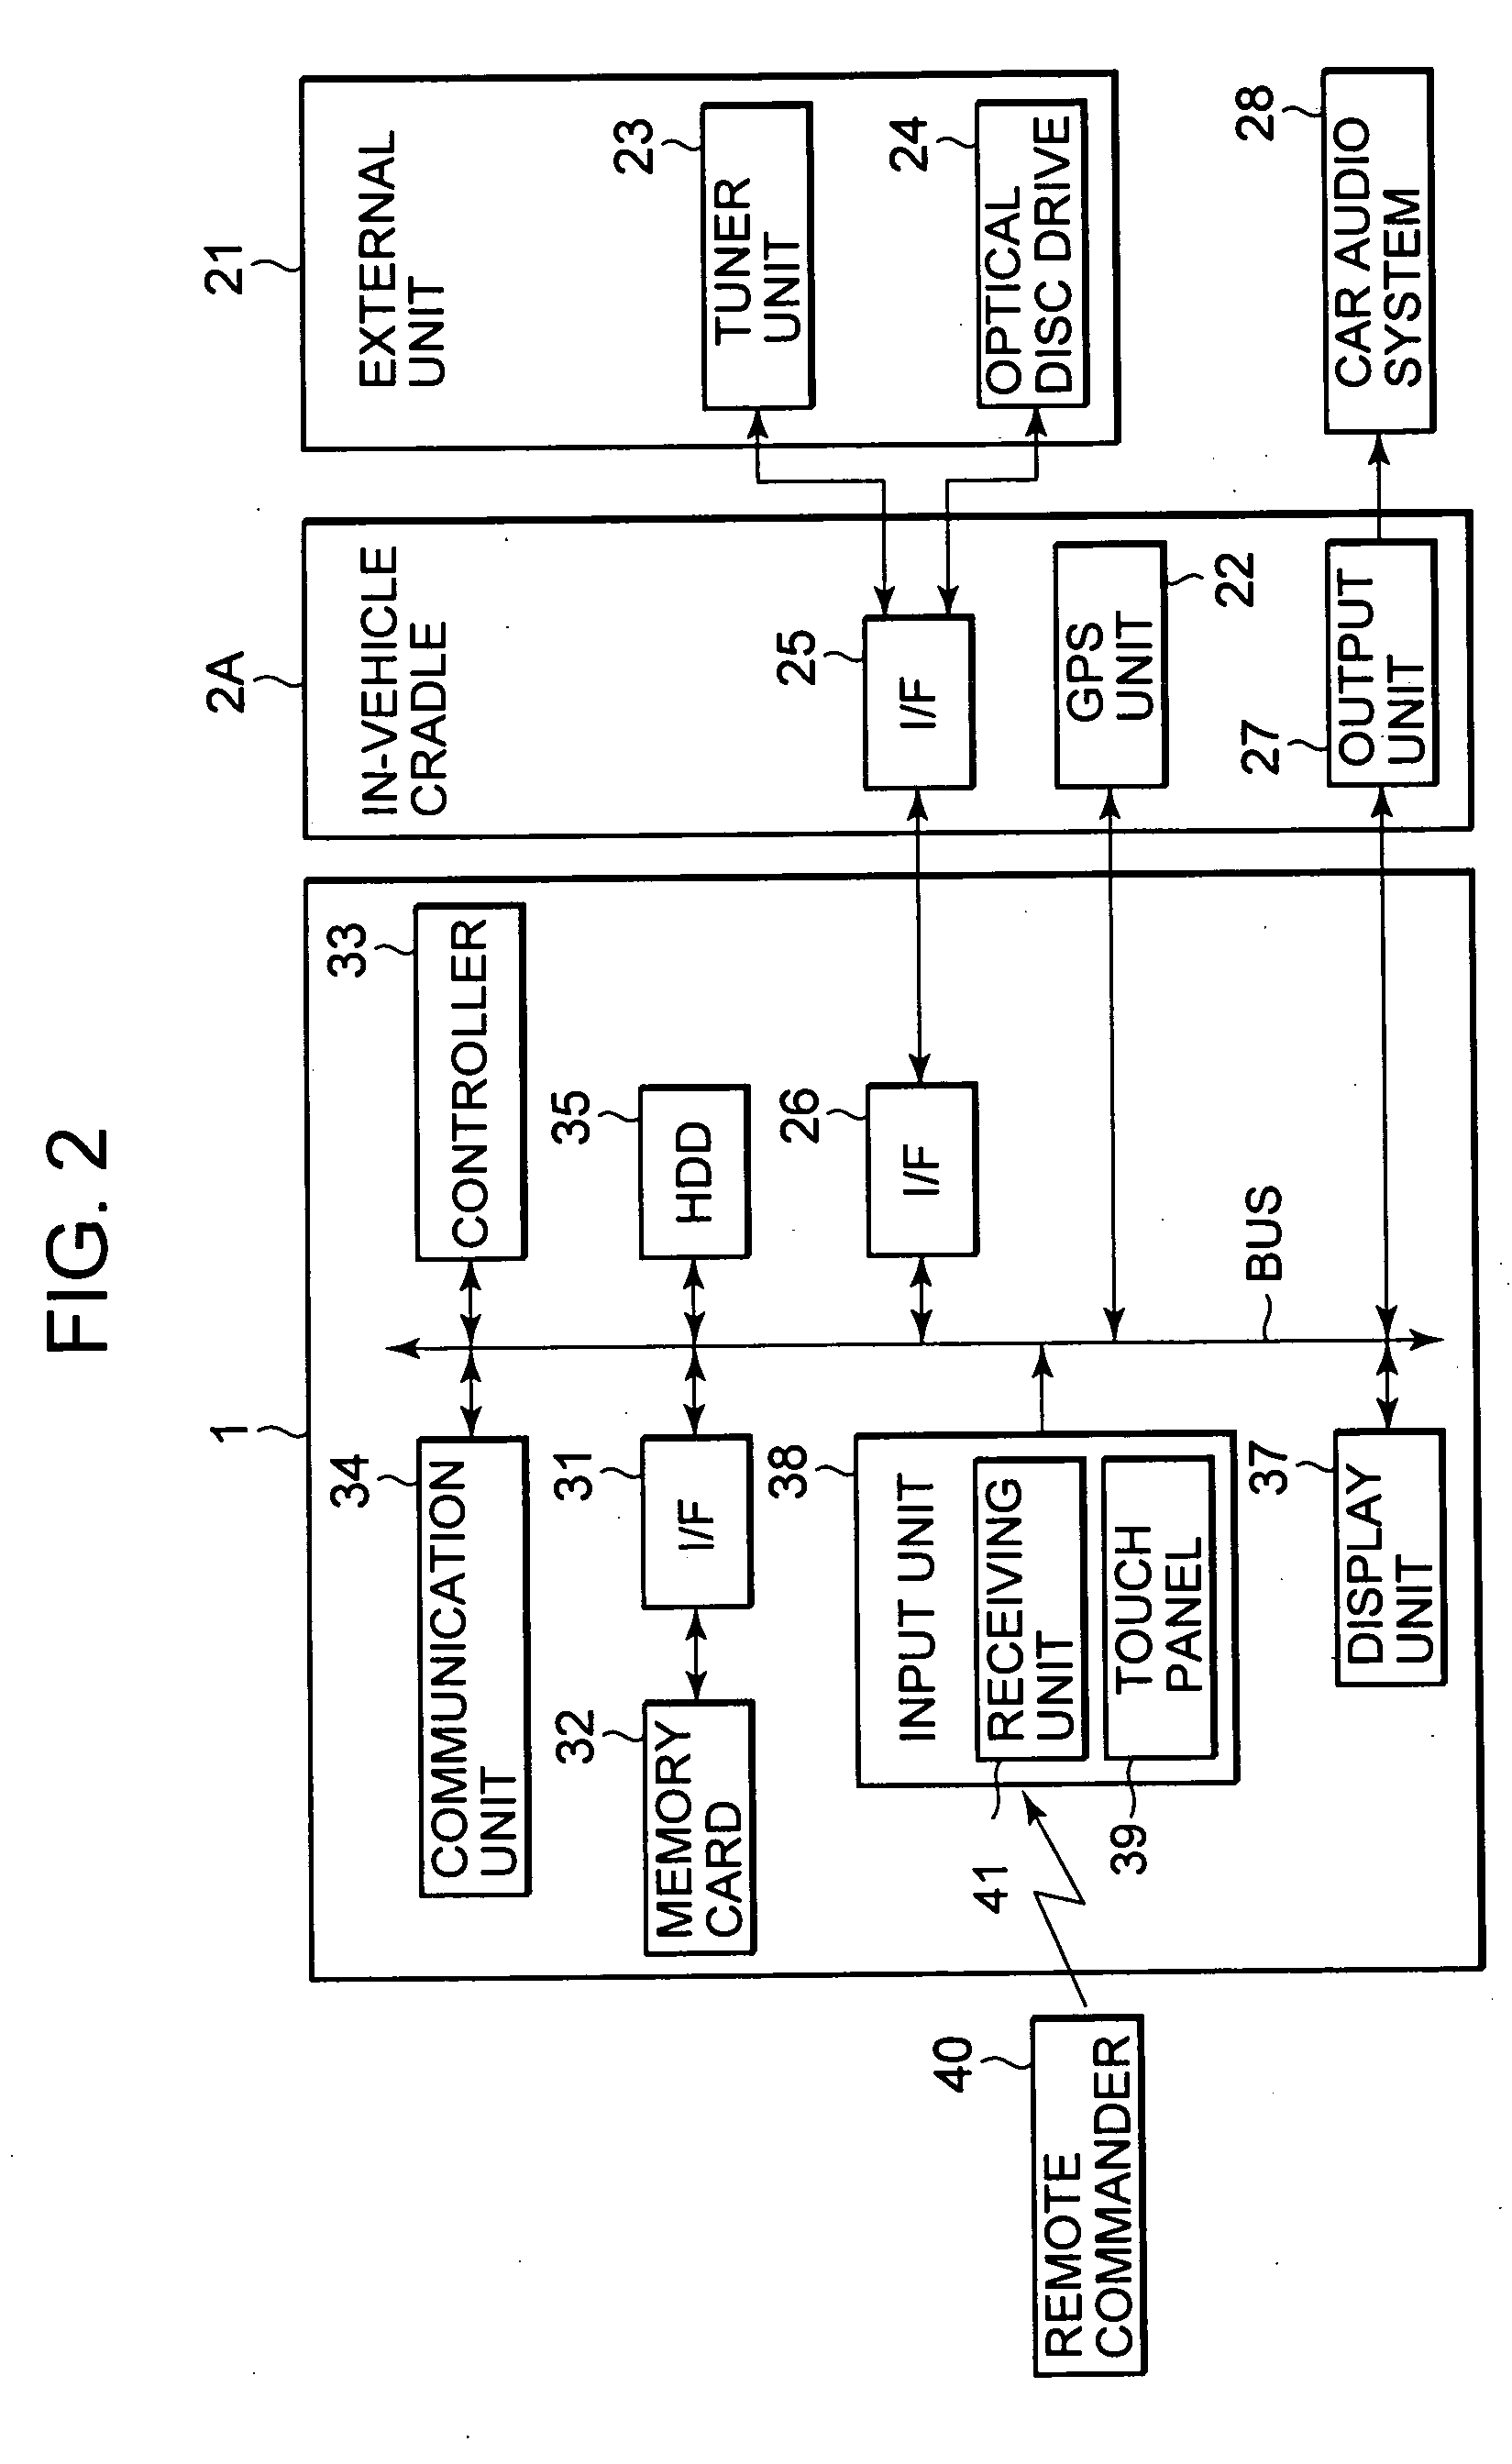 On-vehicle apparatus and content providing method